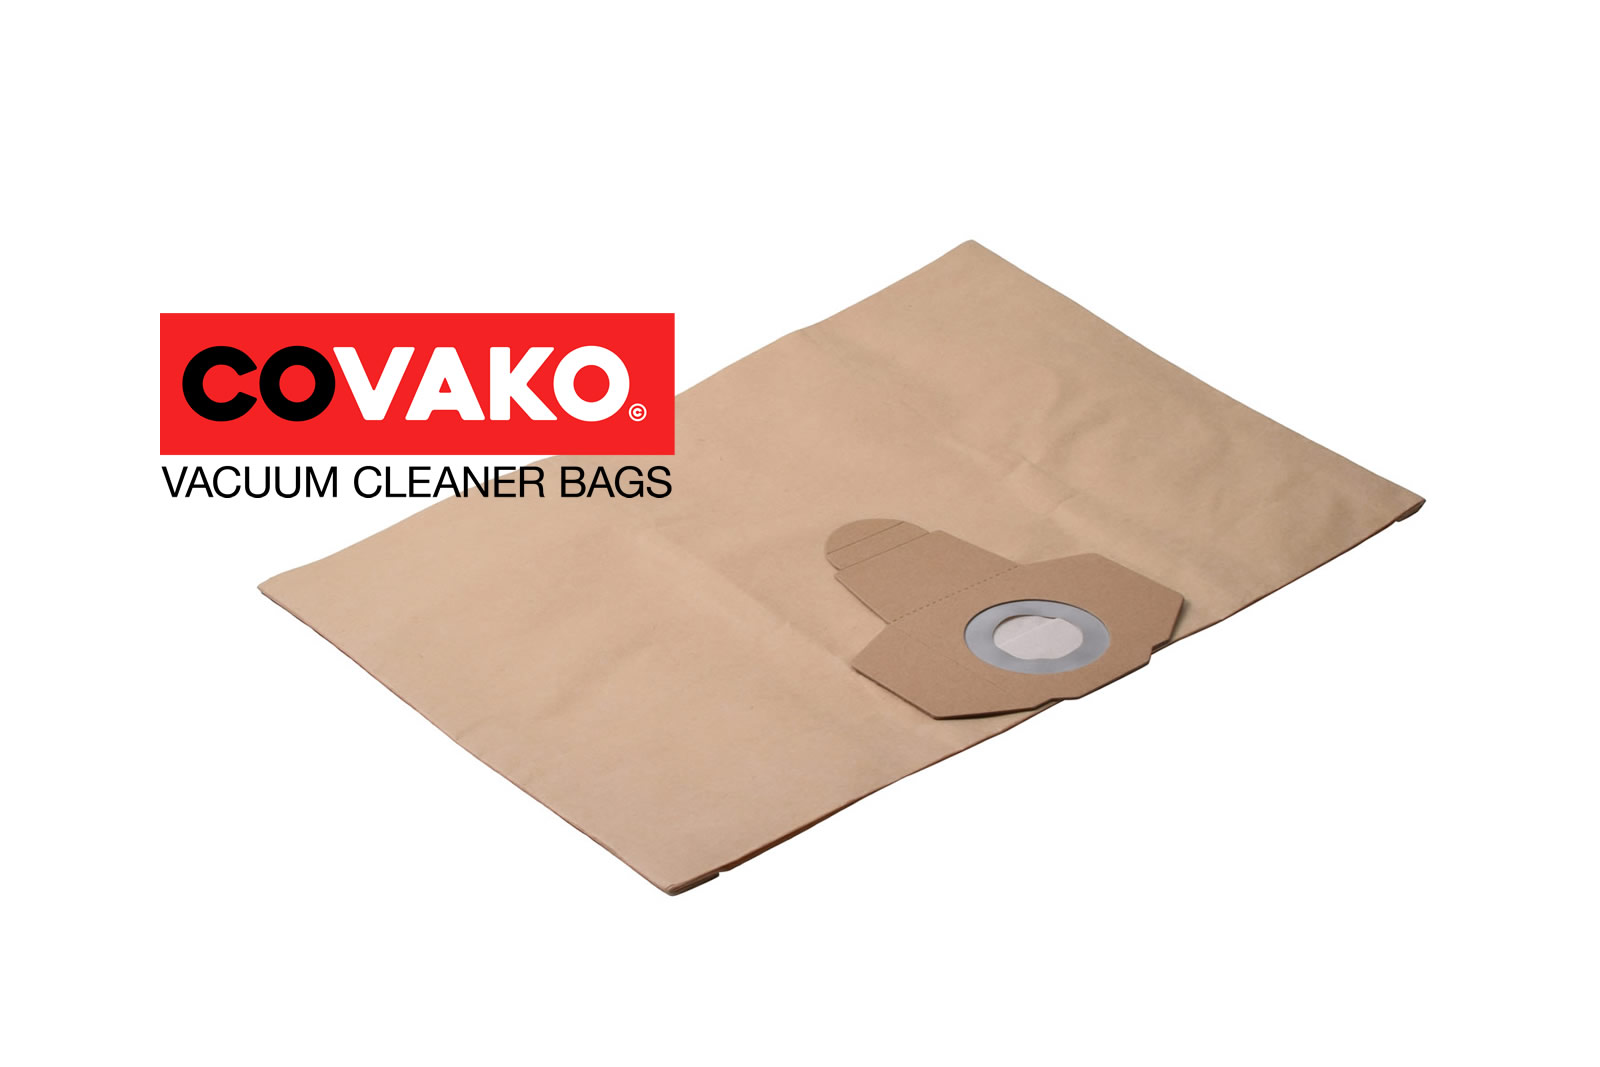 Einhell RT-VC 1420 / Paper - Einhell vacuum cleaner bags